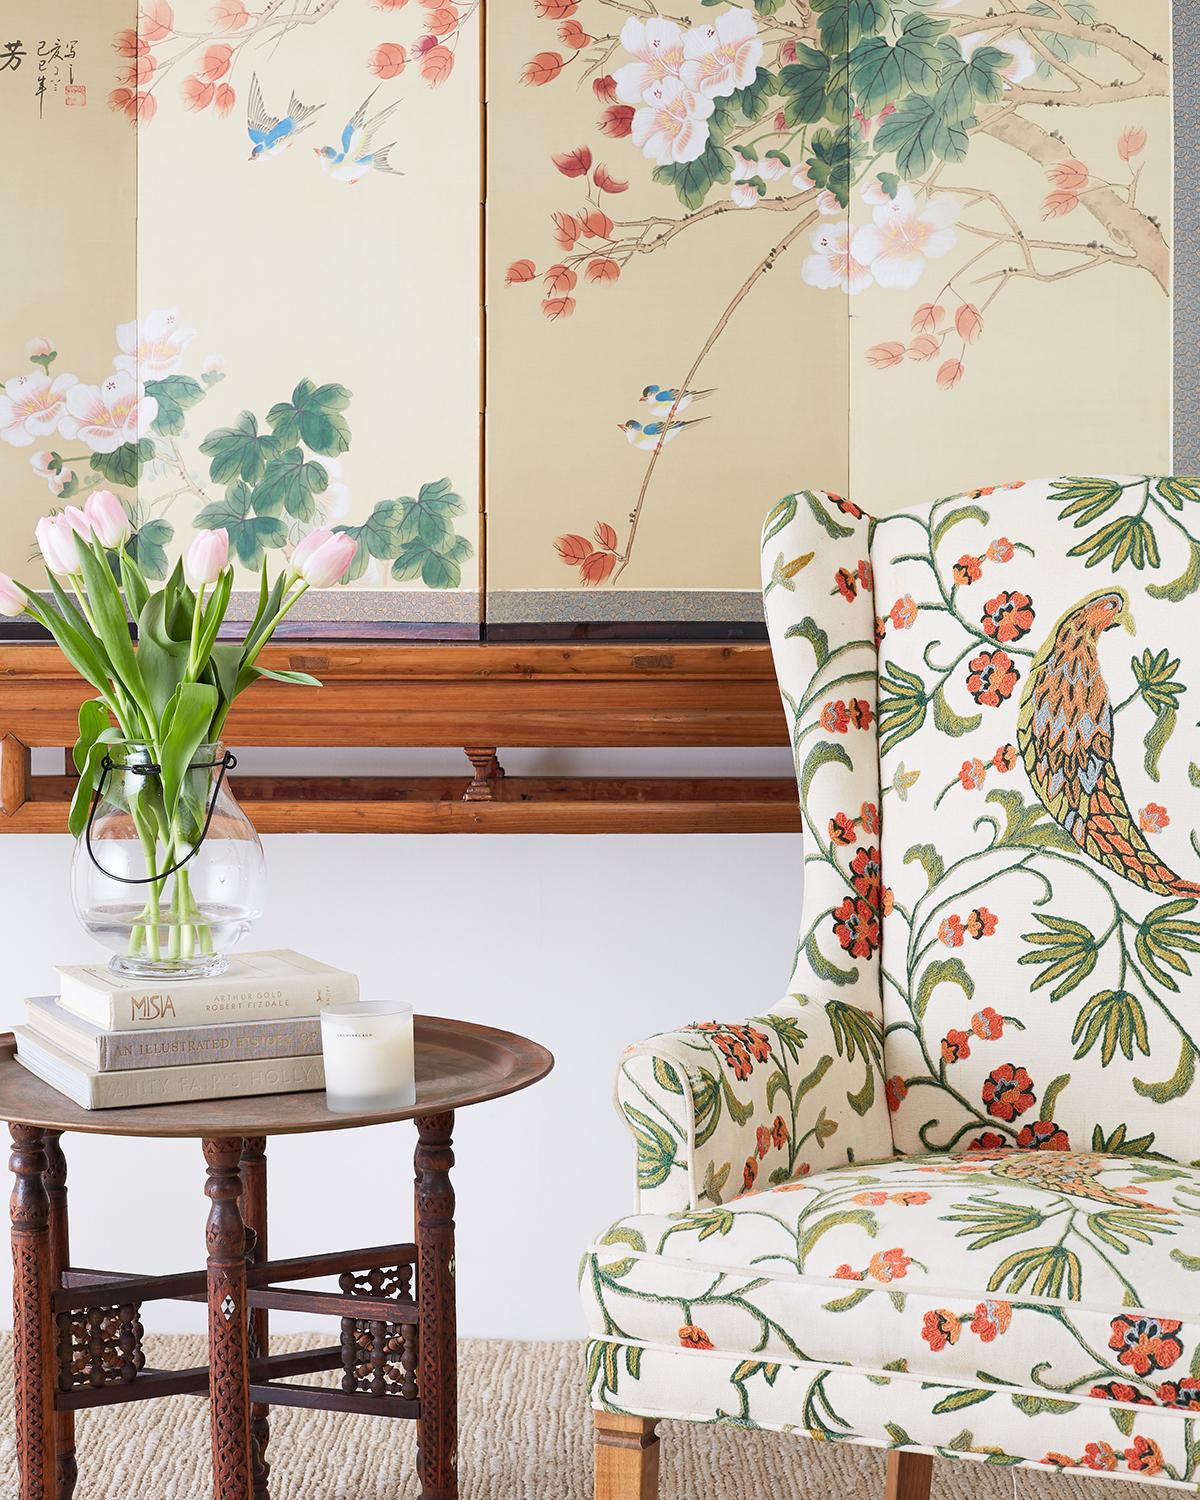 Stunning pair of English style wing chairs or wingback chairs featuring an upholstered crewel work frame. The crewel work embroidery depicts a large peacock style bird among brightly colored flowers and foliate vine designs. Each chair back is